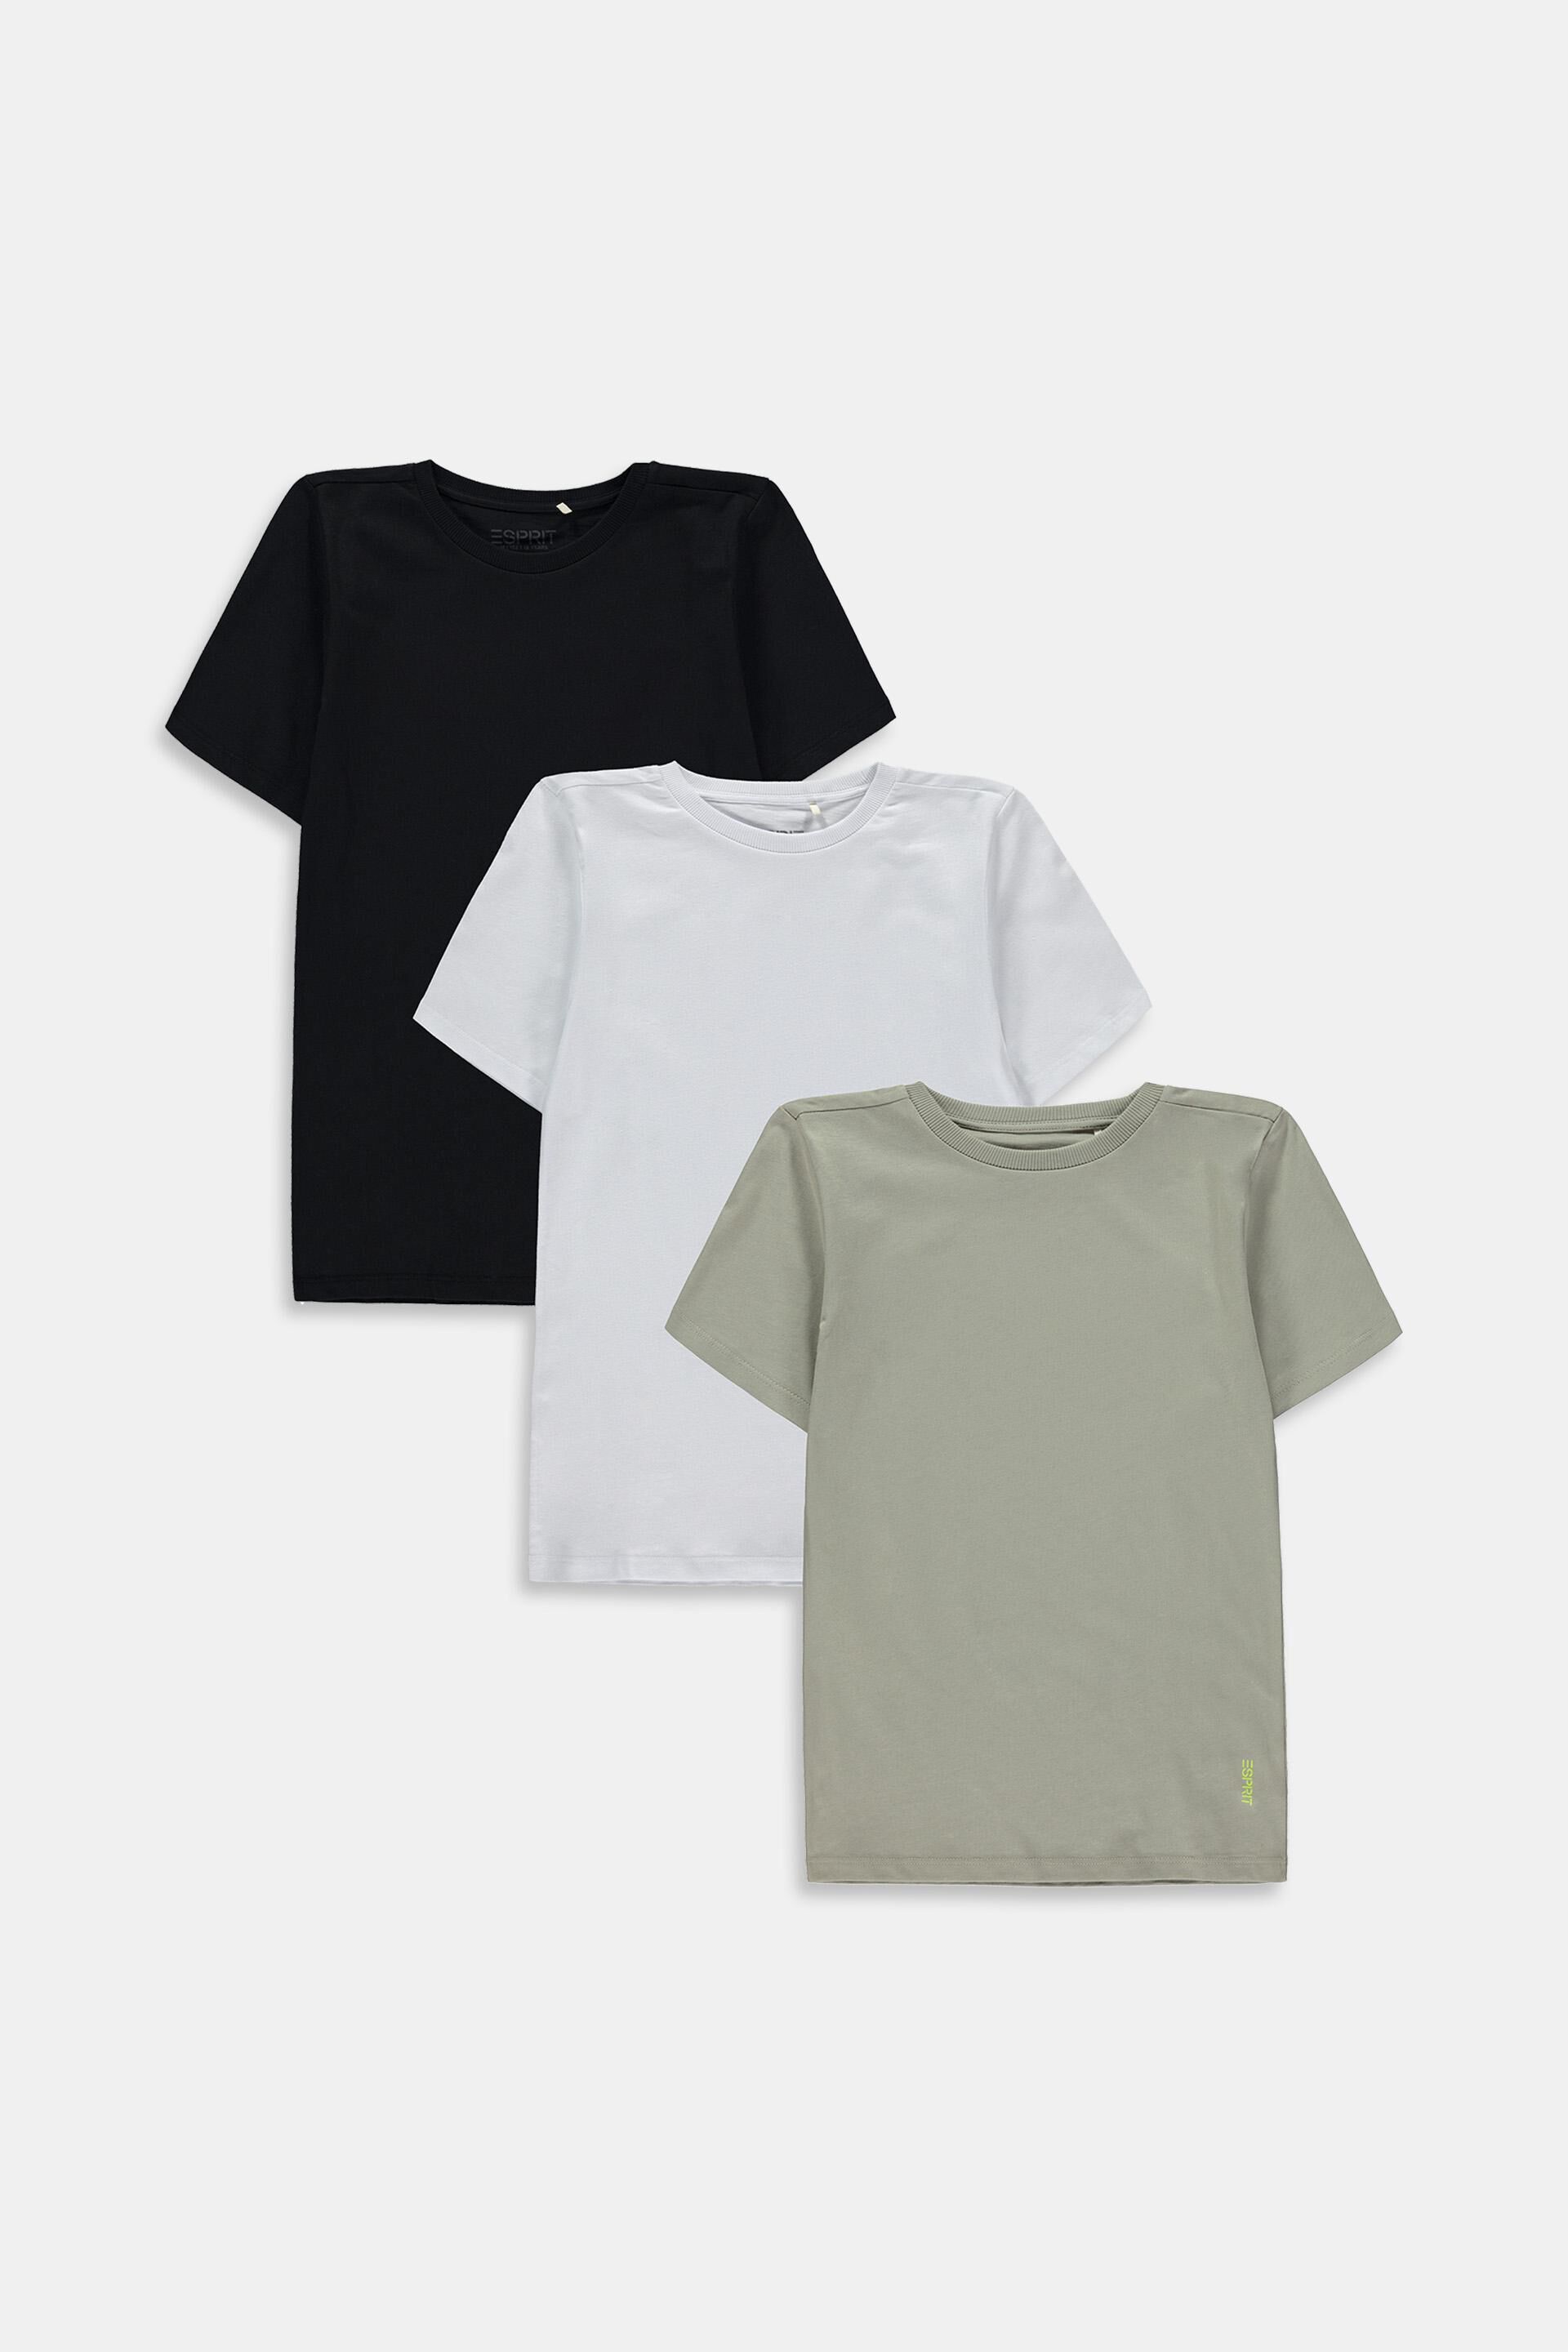 3-pack of pure cotton t-shirts